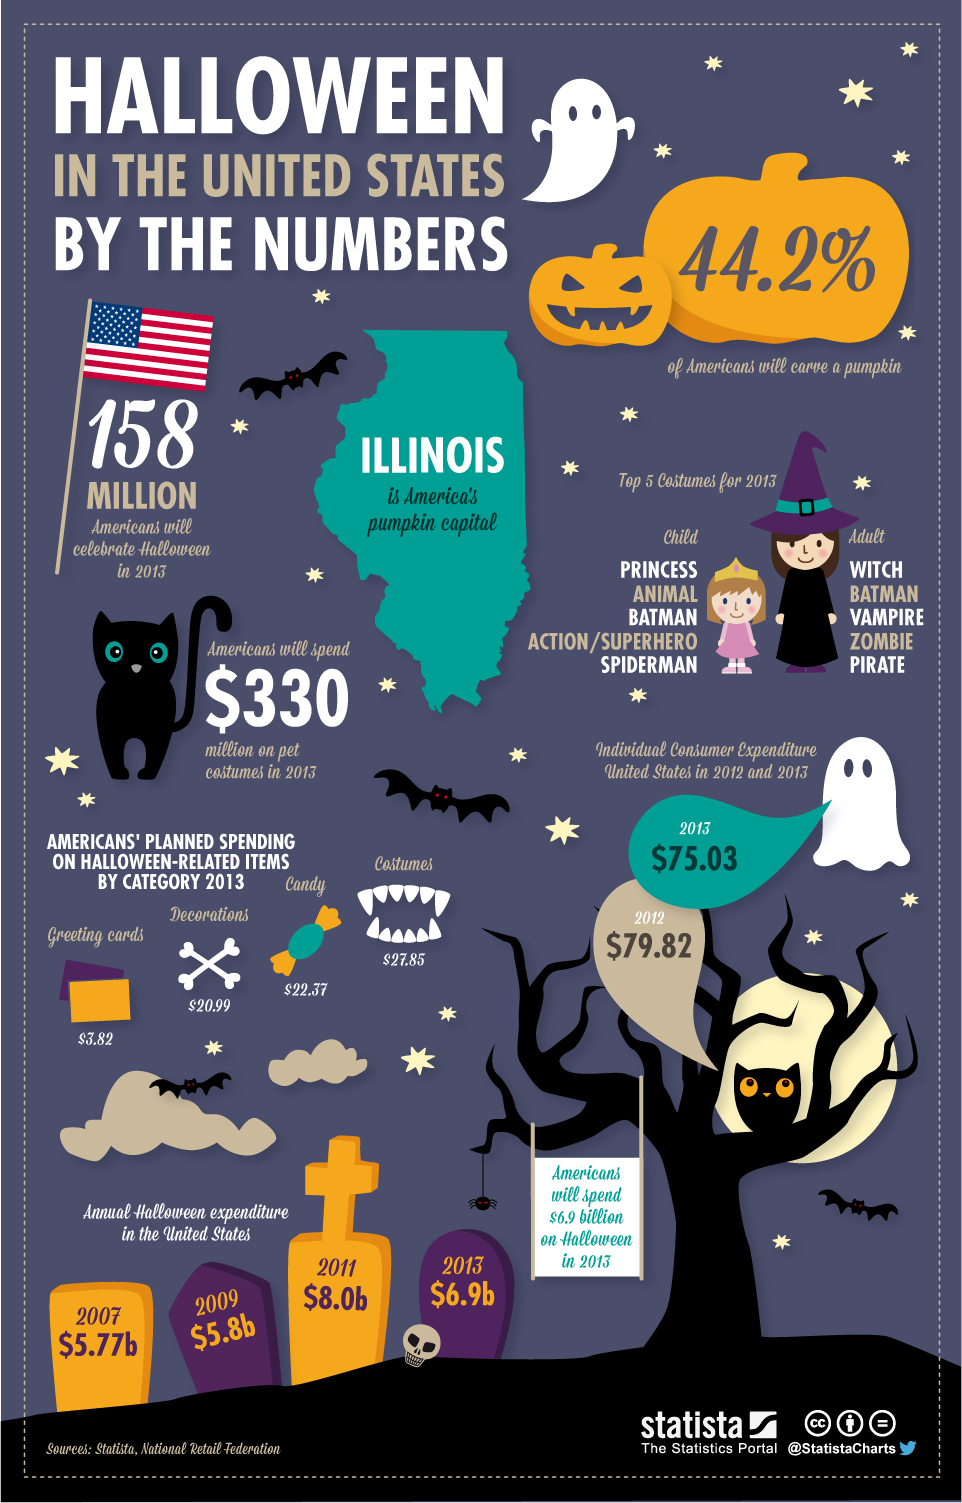 chartoftheday_1586_Halloween_in_the_United_States_By_the_Numbers_b